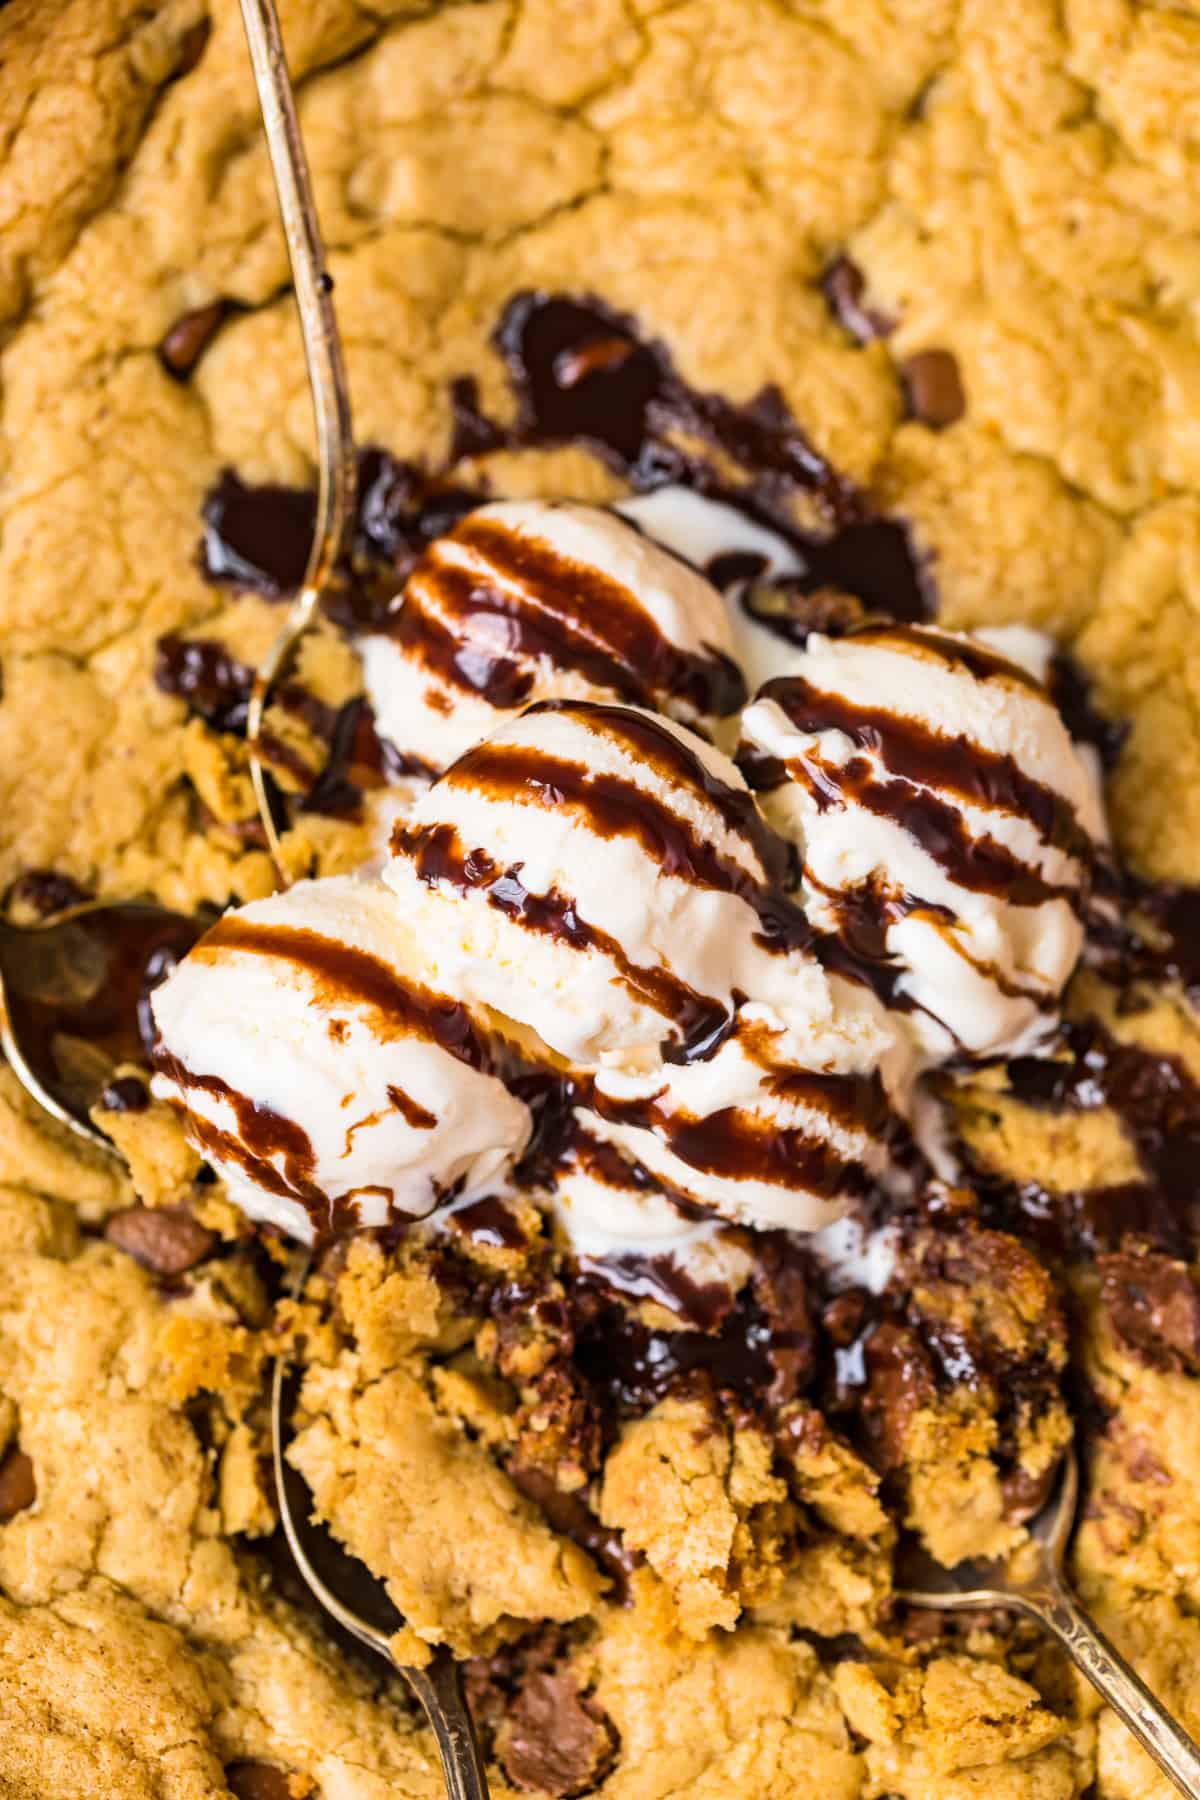 Skillet Chocolate Chip Cookie Recipe - The Cookie Rookie®